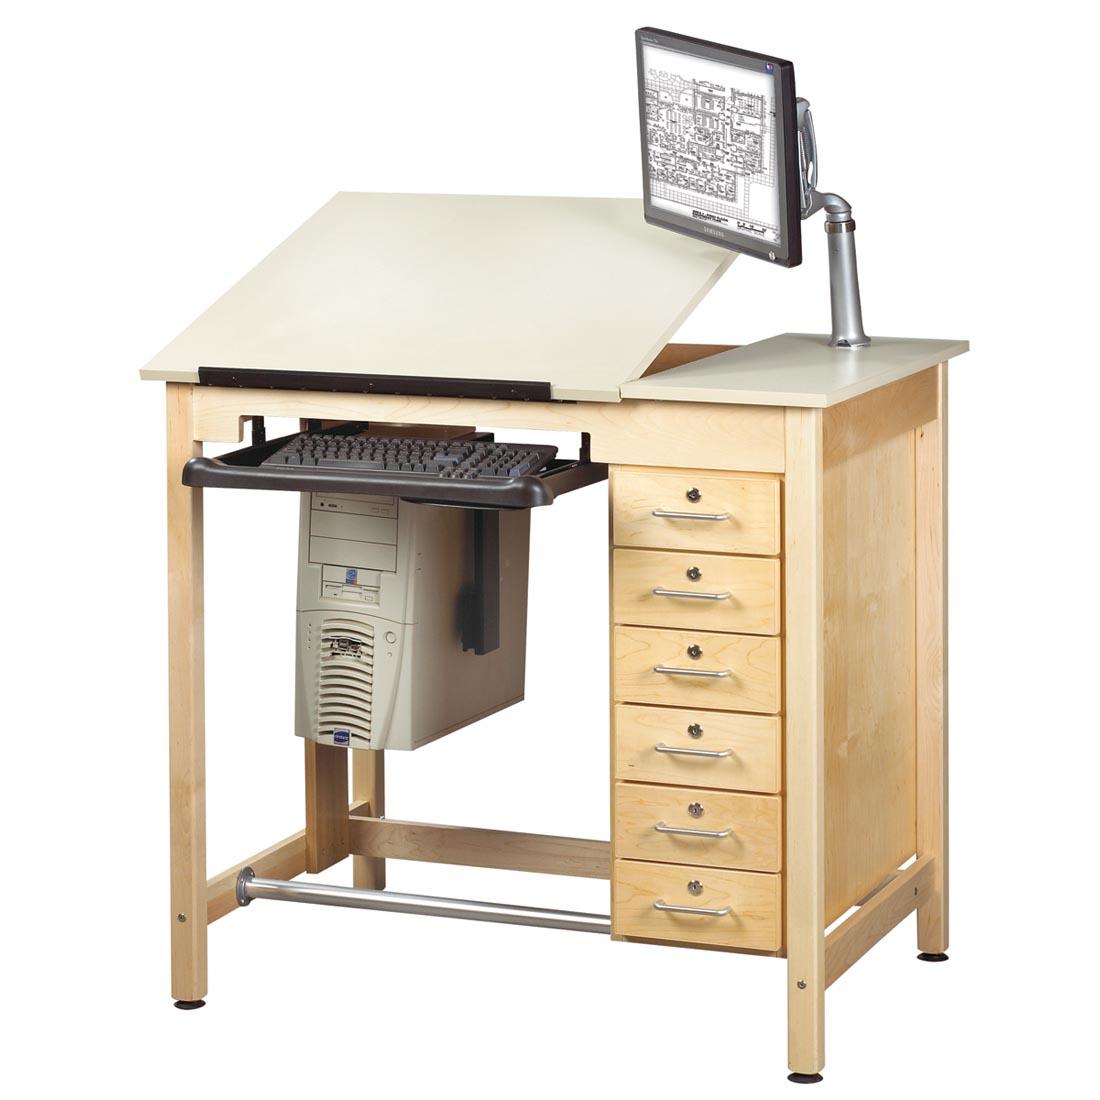 Drawing Table With Drawers shown with mounted computer as a suggestion